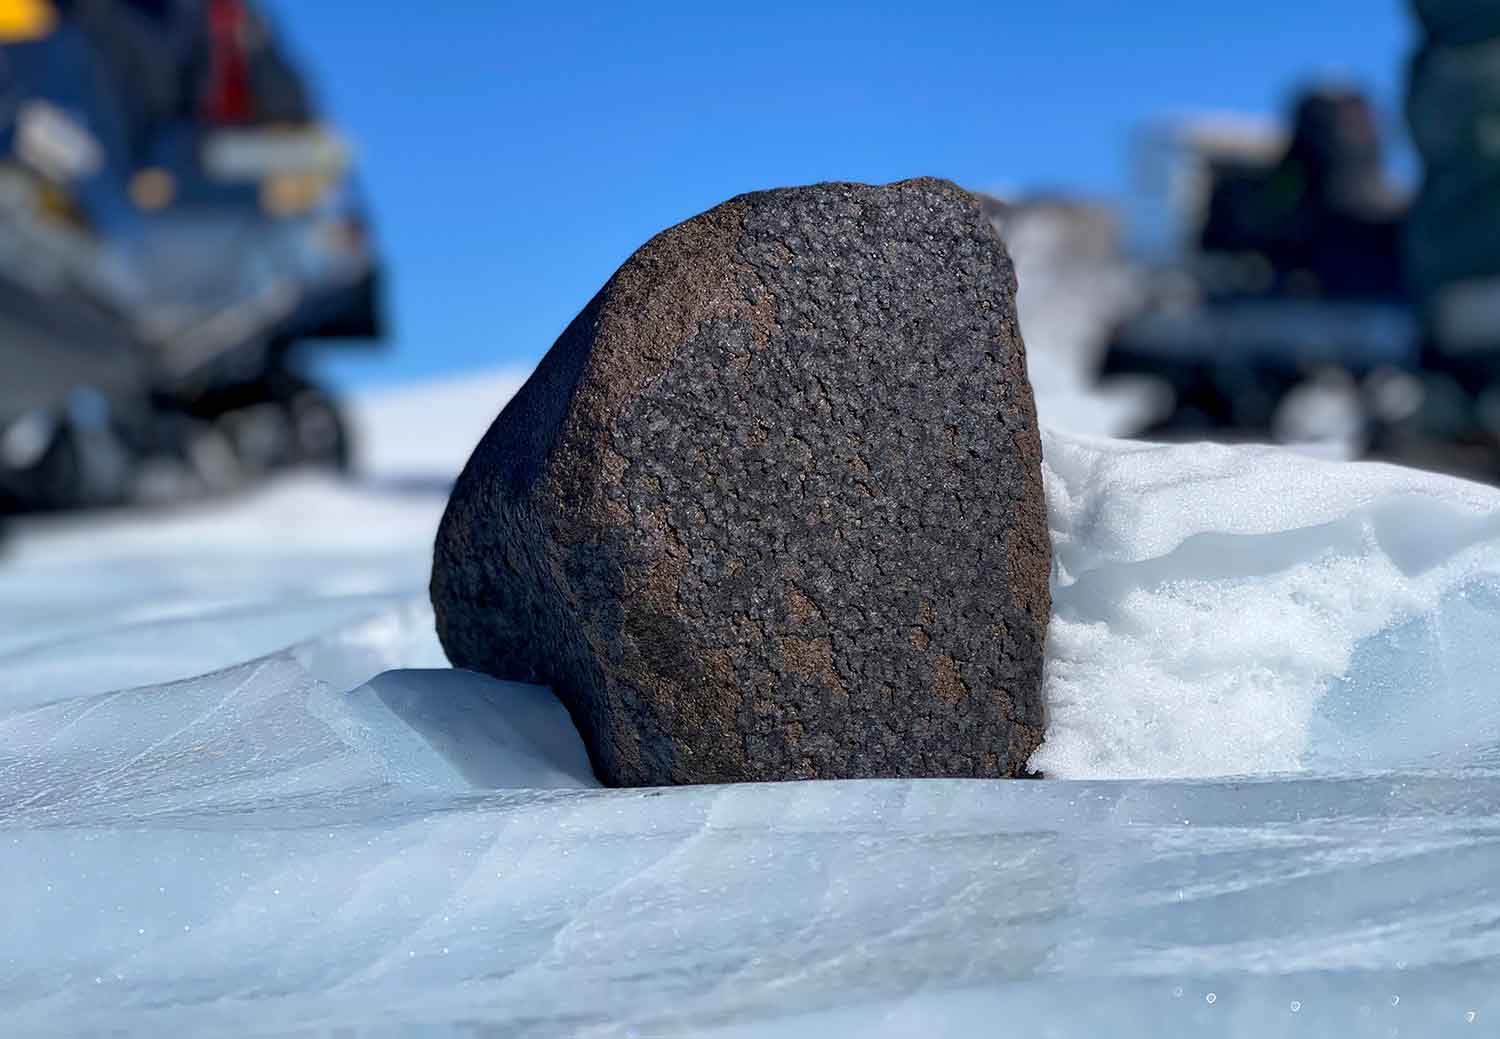 The meteorite isn’t very large, but it’s fairly heavy because it’s mostly made up of metal.